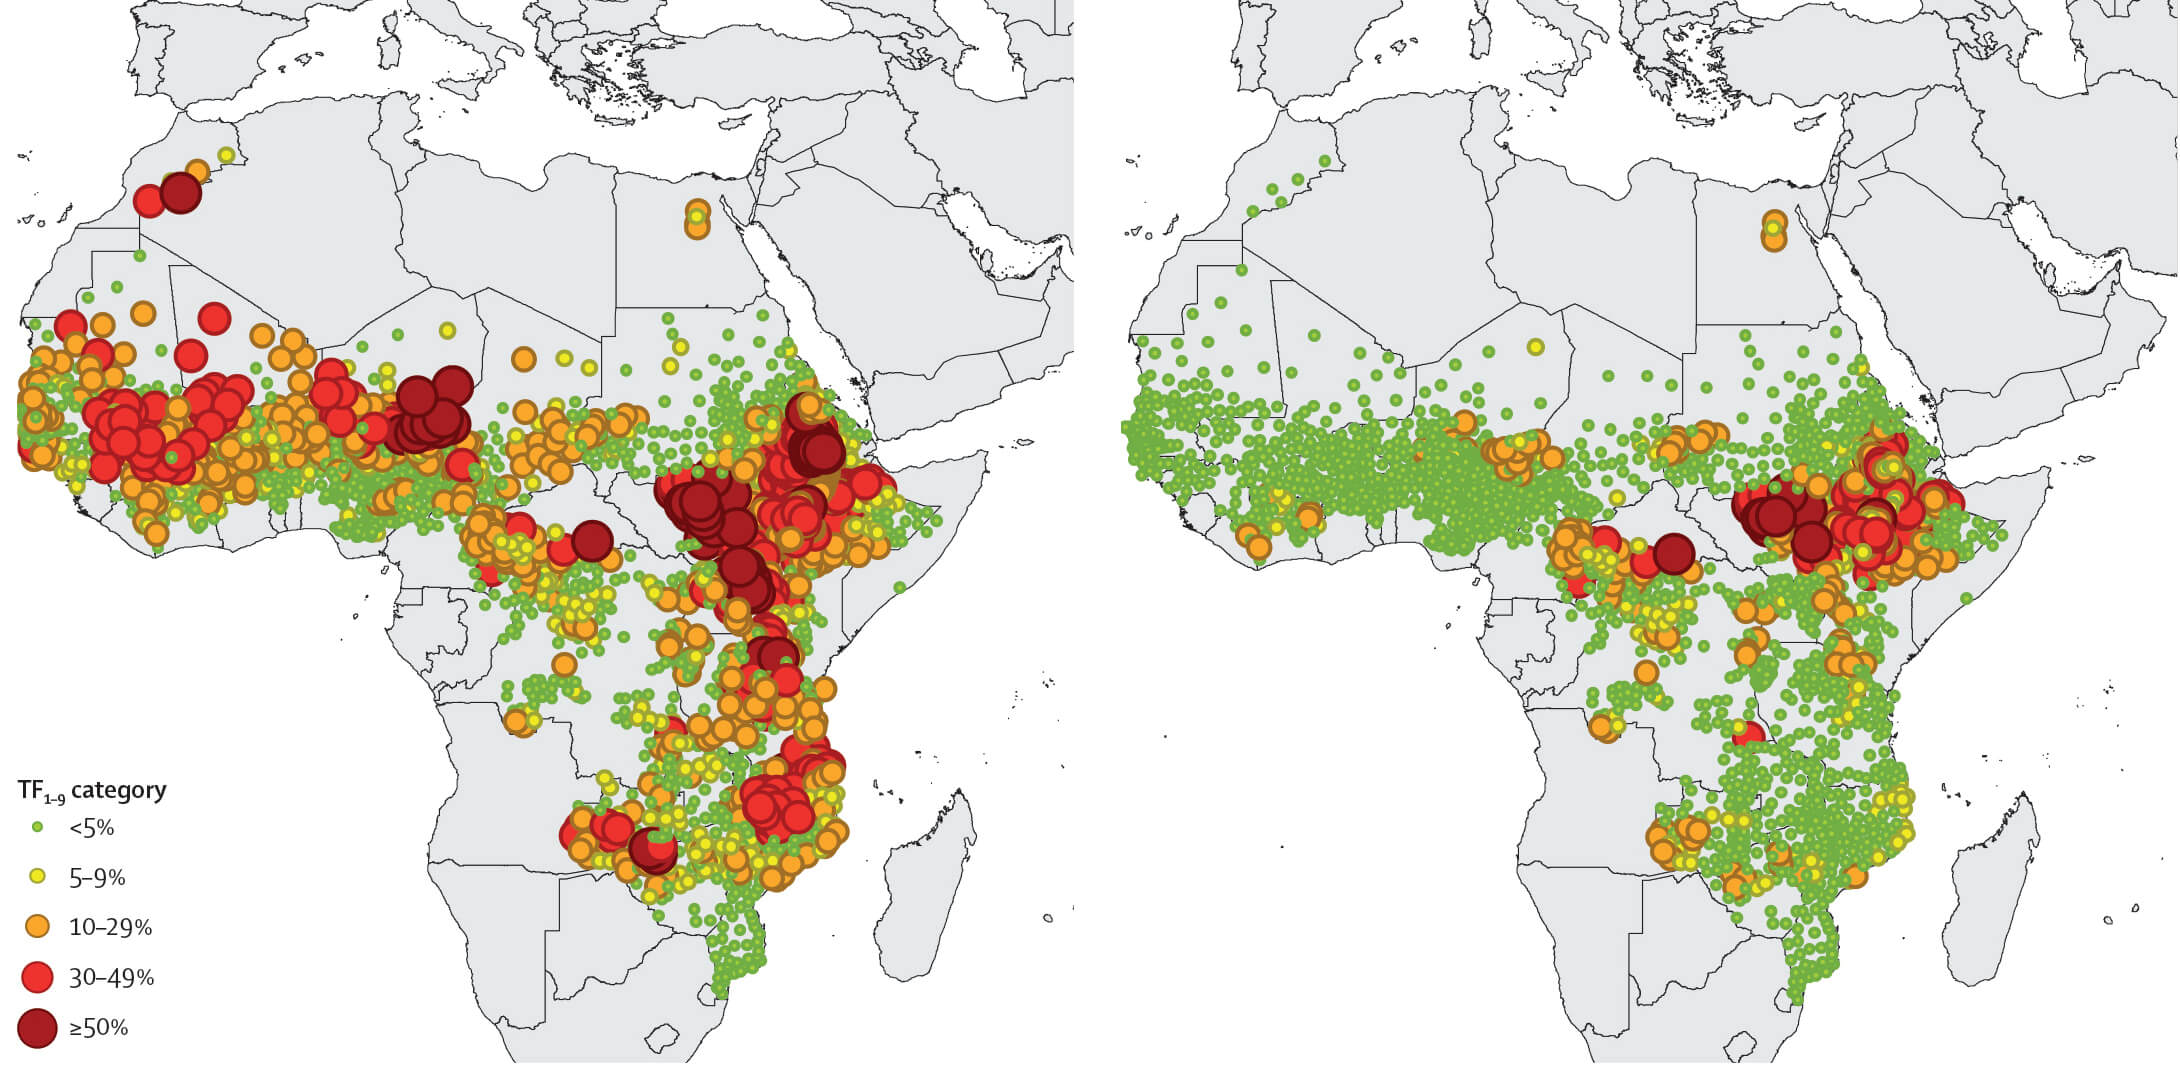 Maps showing the reduction in cases of Trachoma in Africa over the last 10 years thanks to CBM-supported programs.